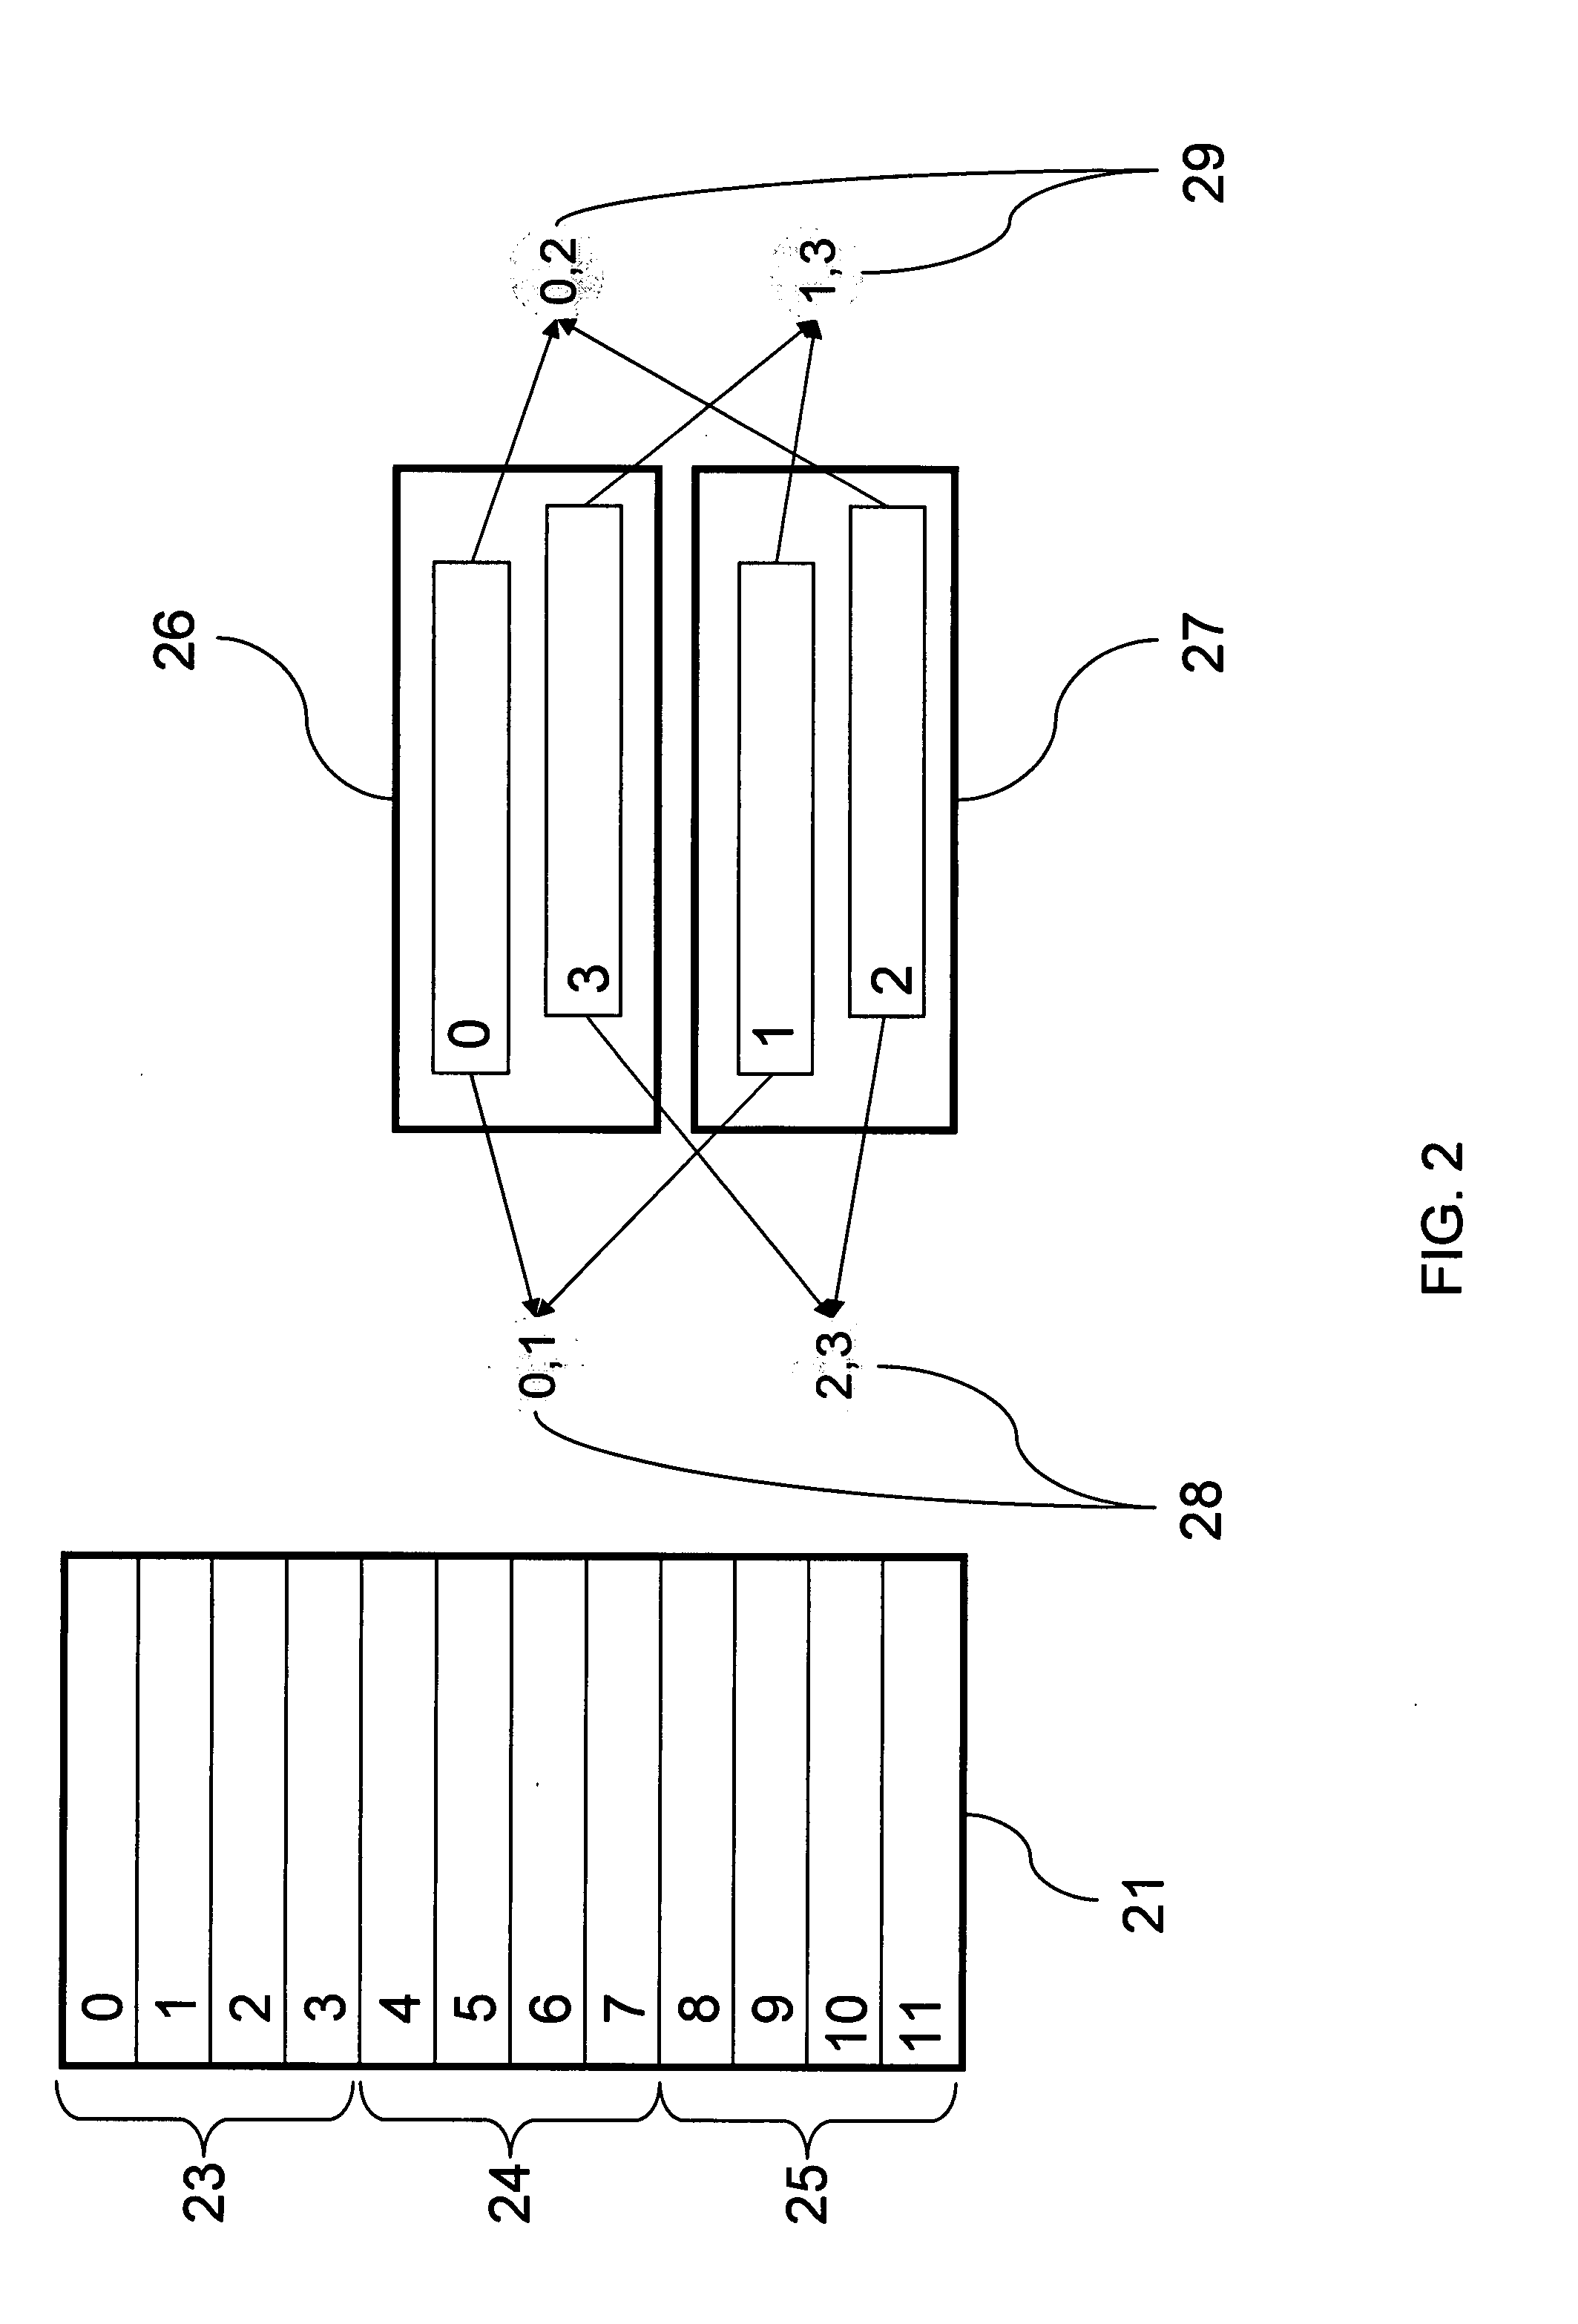 Apparatus and methods for optimization of image and motion picture memory access